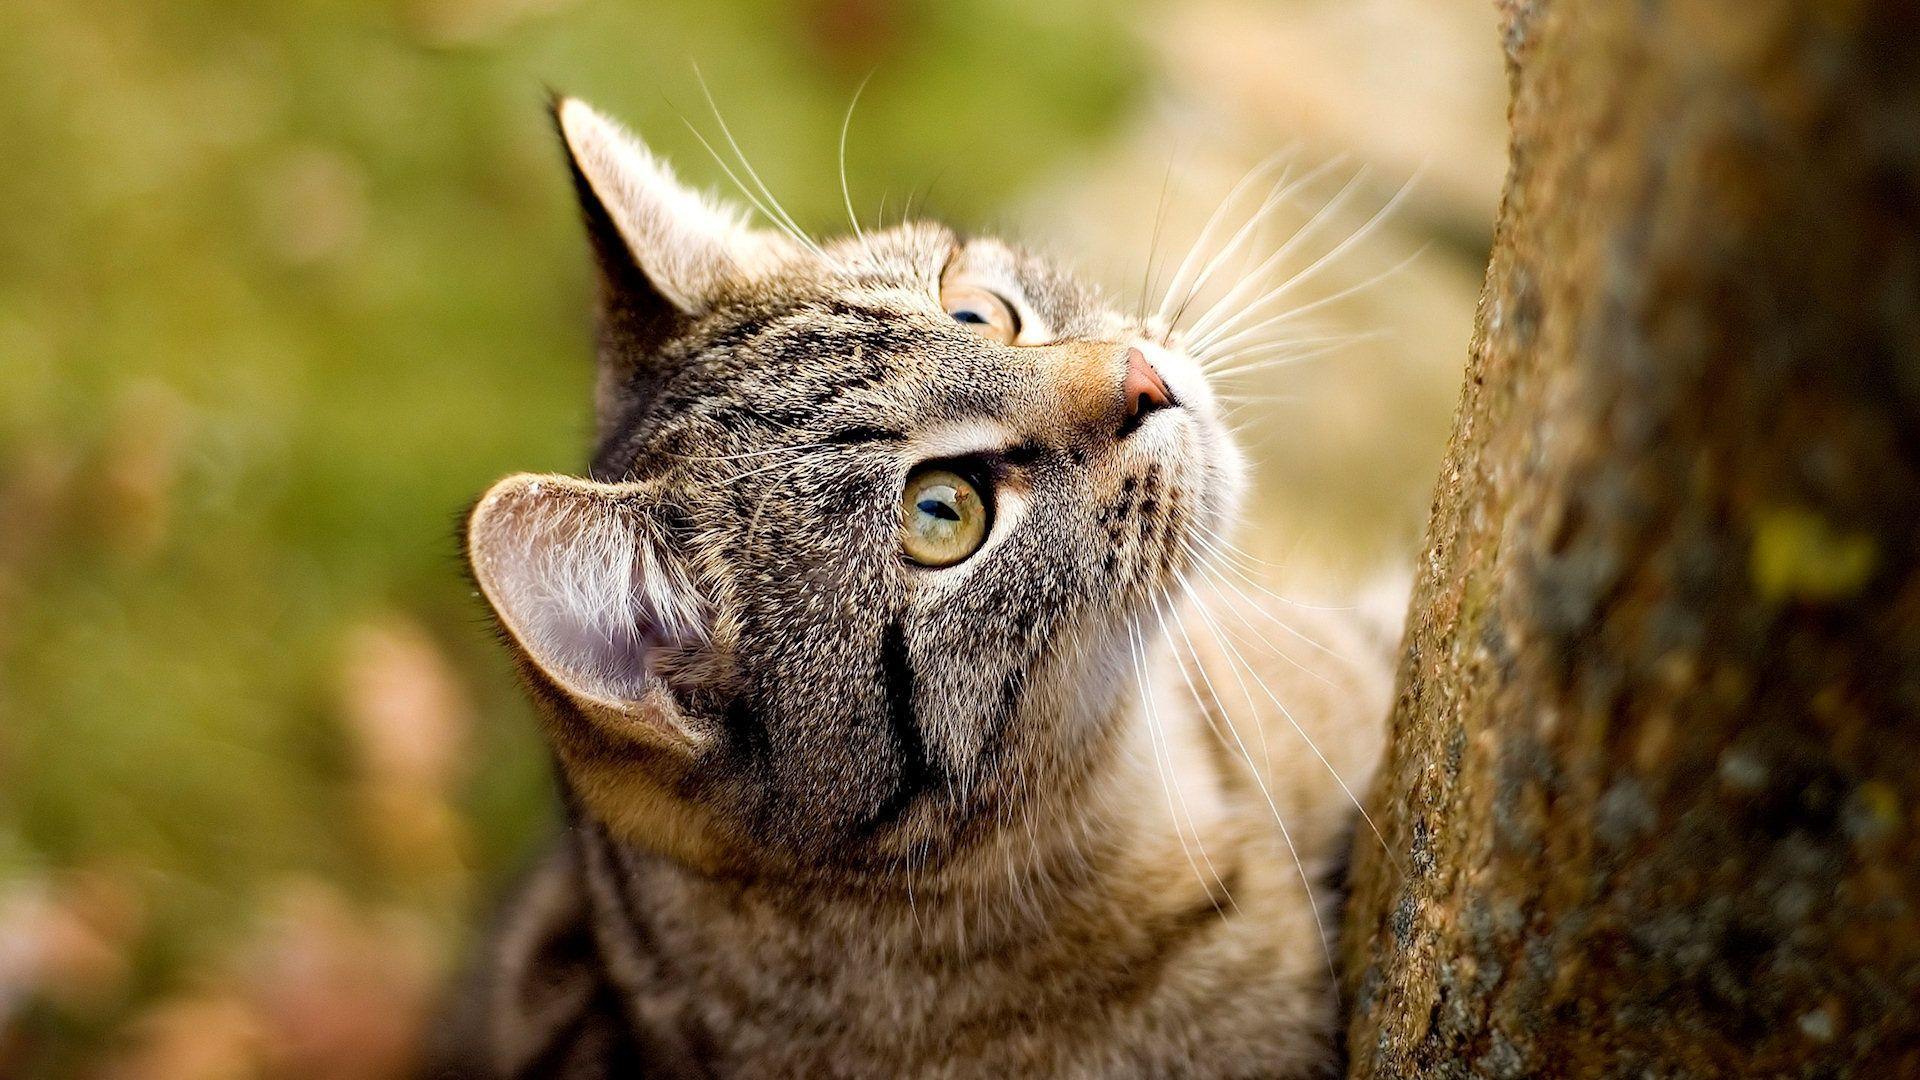 Free HD Cat Wallpaper -Learn more about how to care for cats at